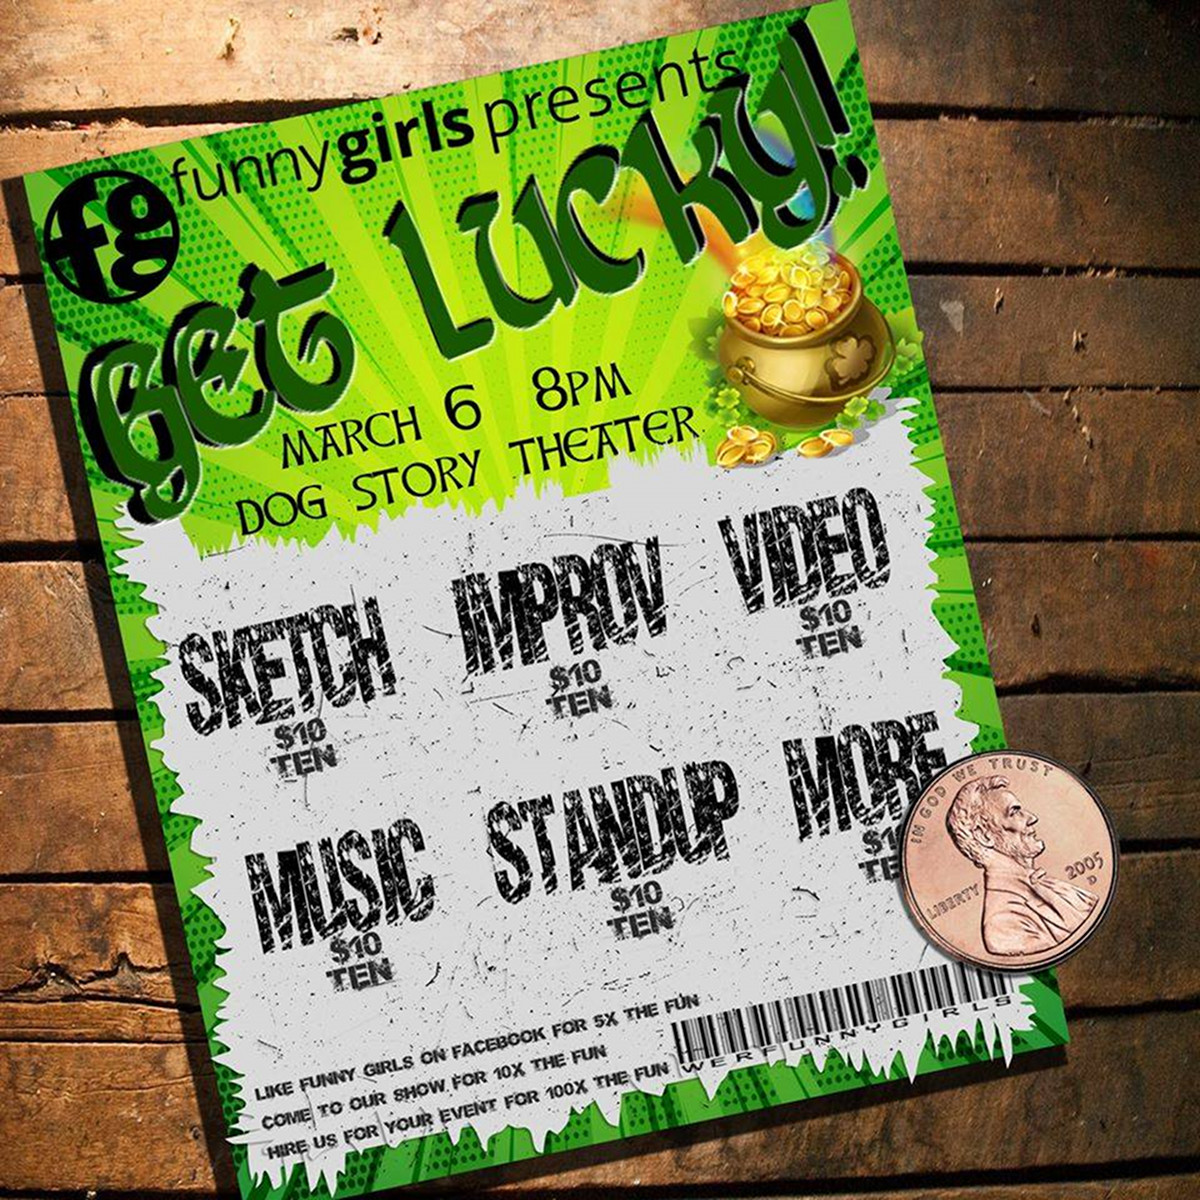 Funny Girls Get Lucky show poster